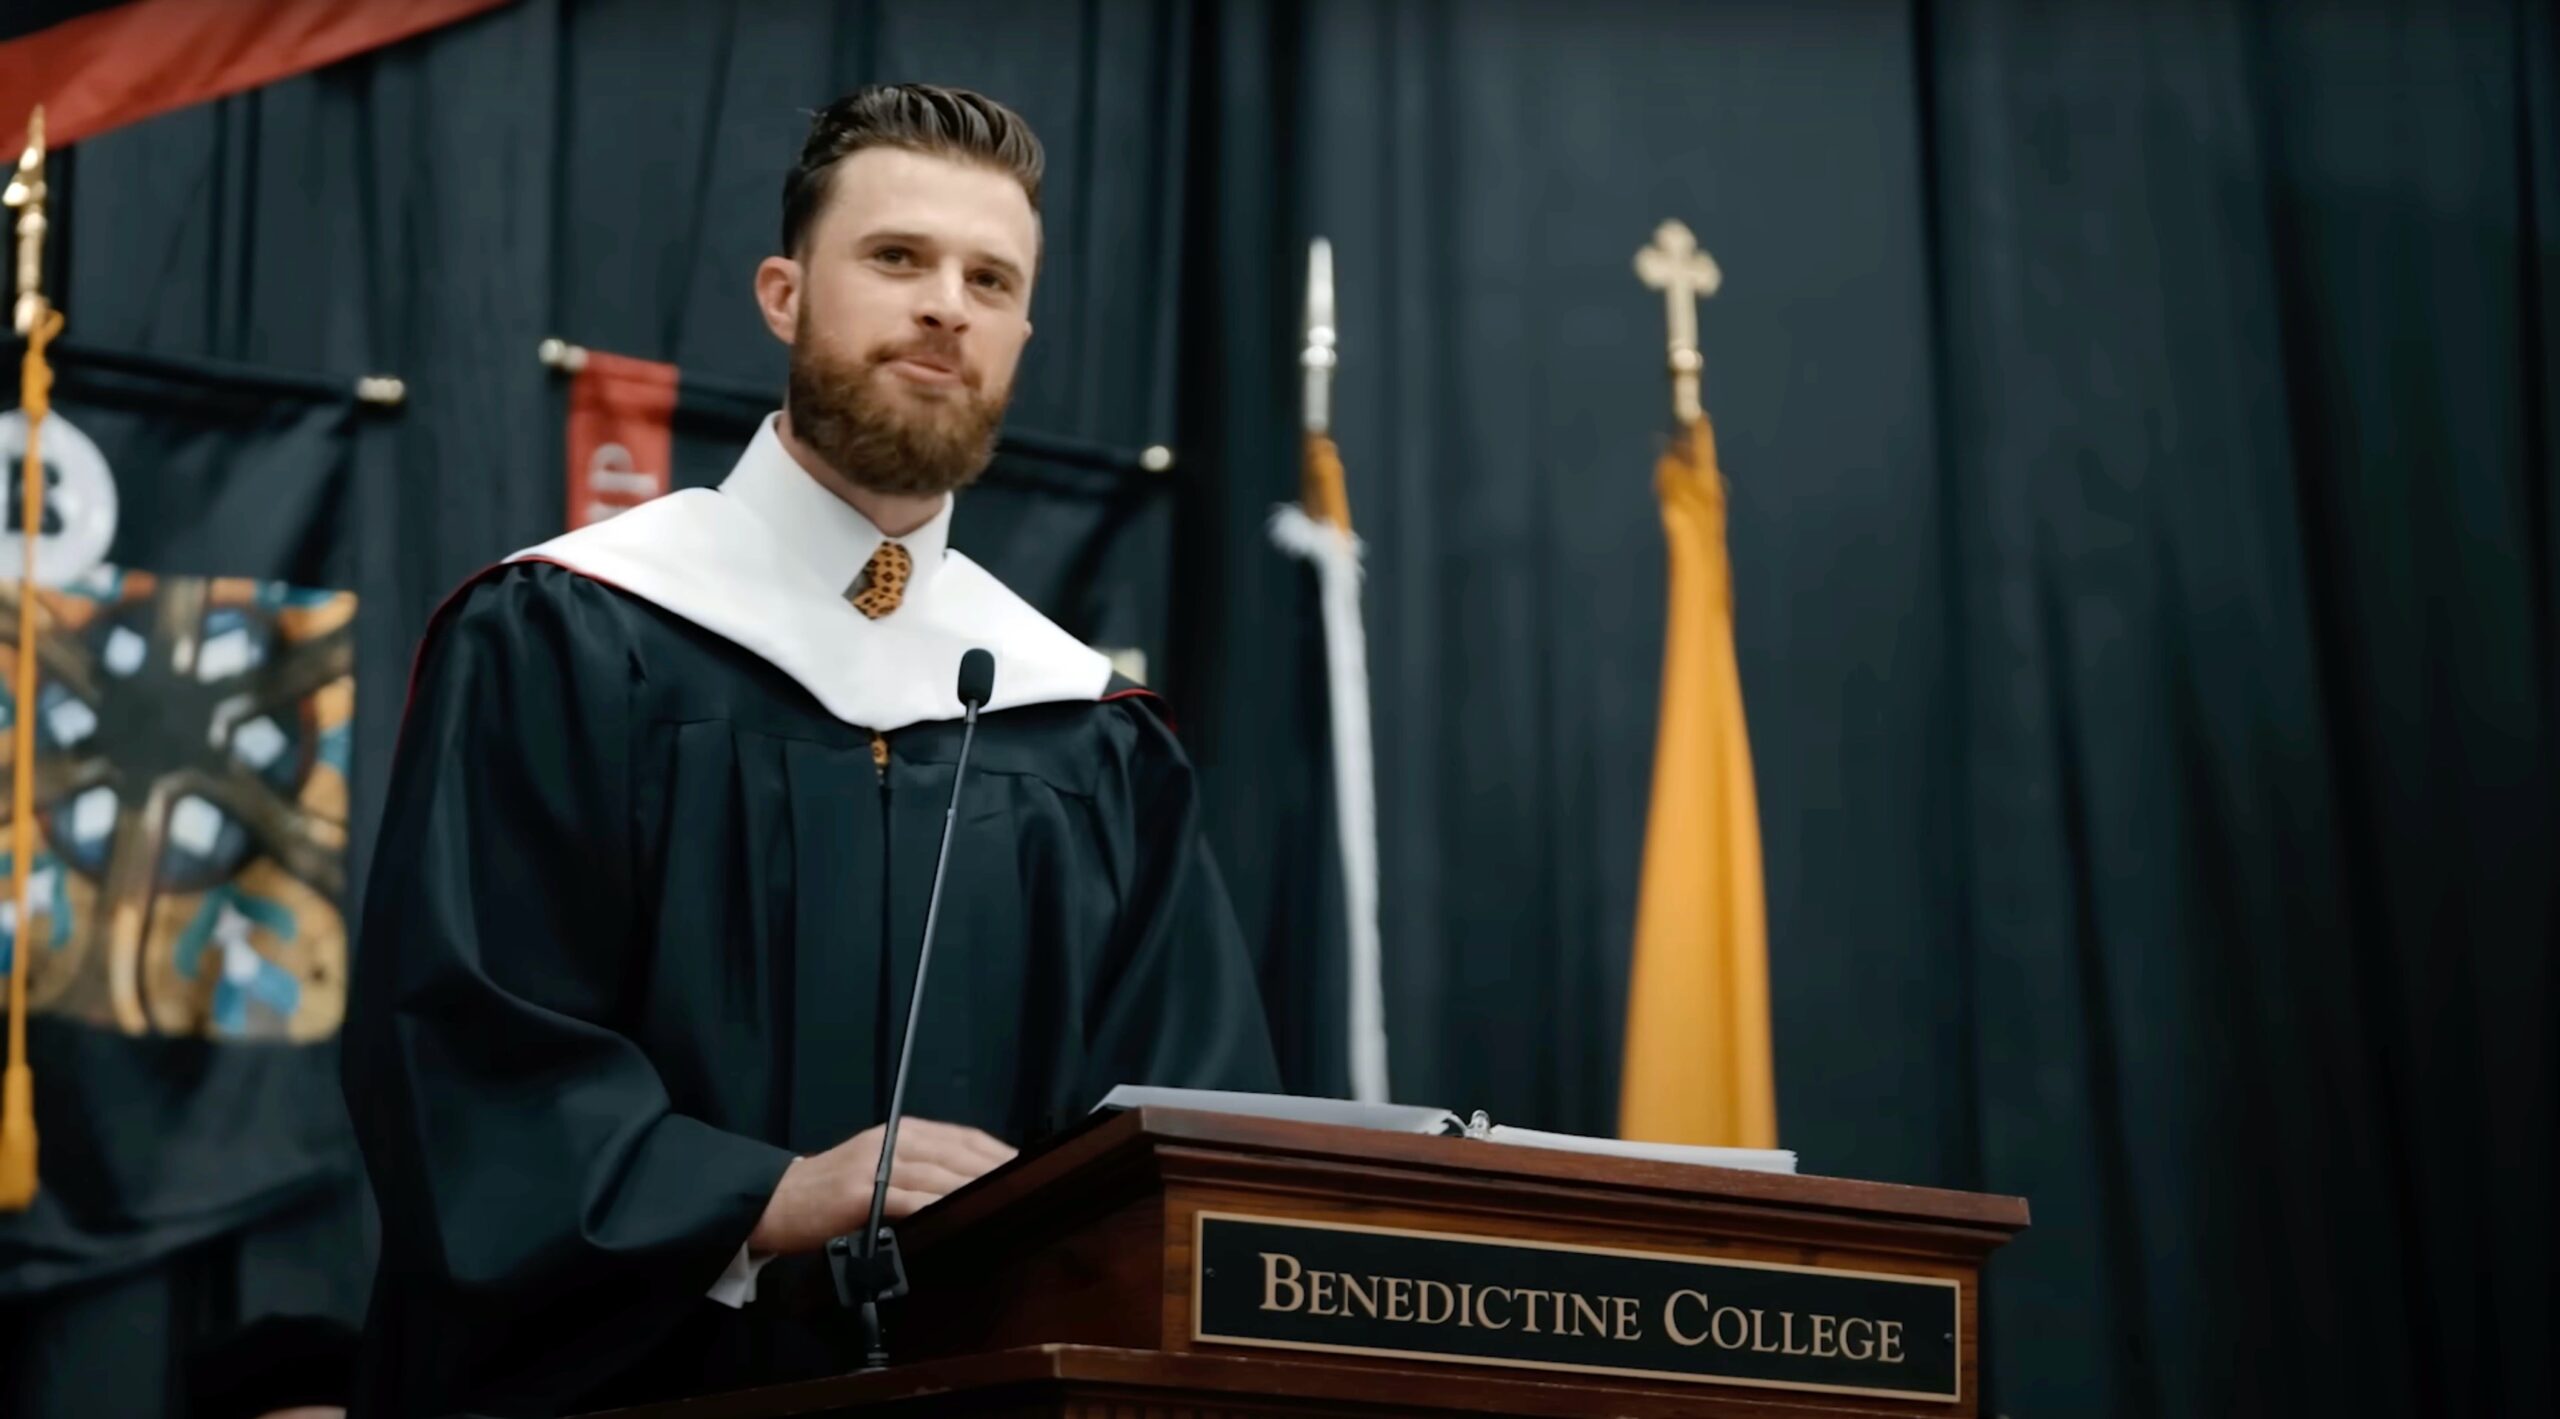 DISGUSTING: Catholic nuns at Benedictine College attack NFL star Harrison Butker for following Catholic teachings |  The Gateway expert